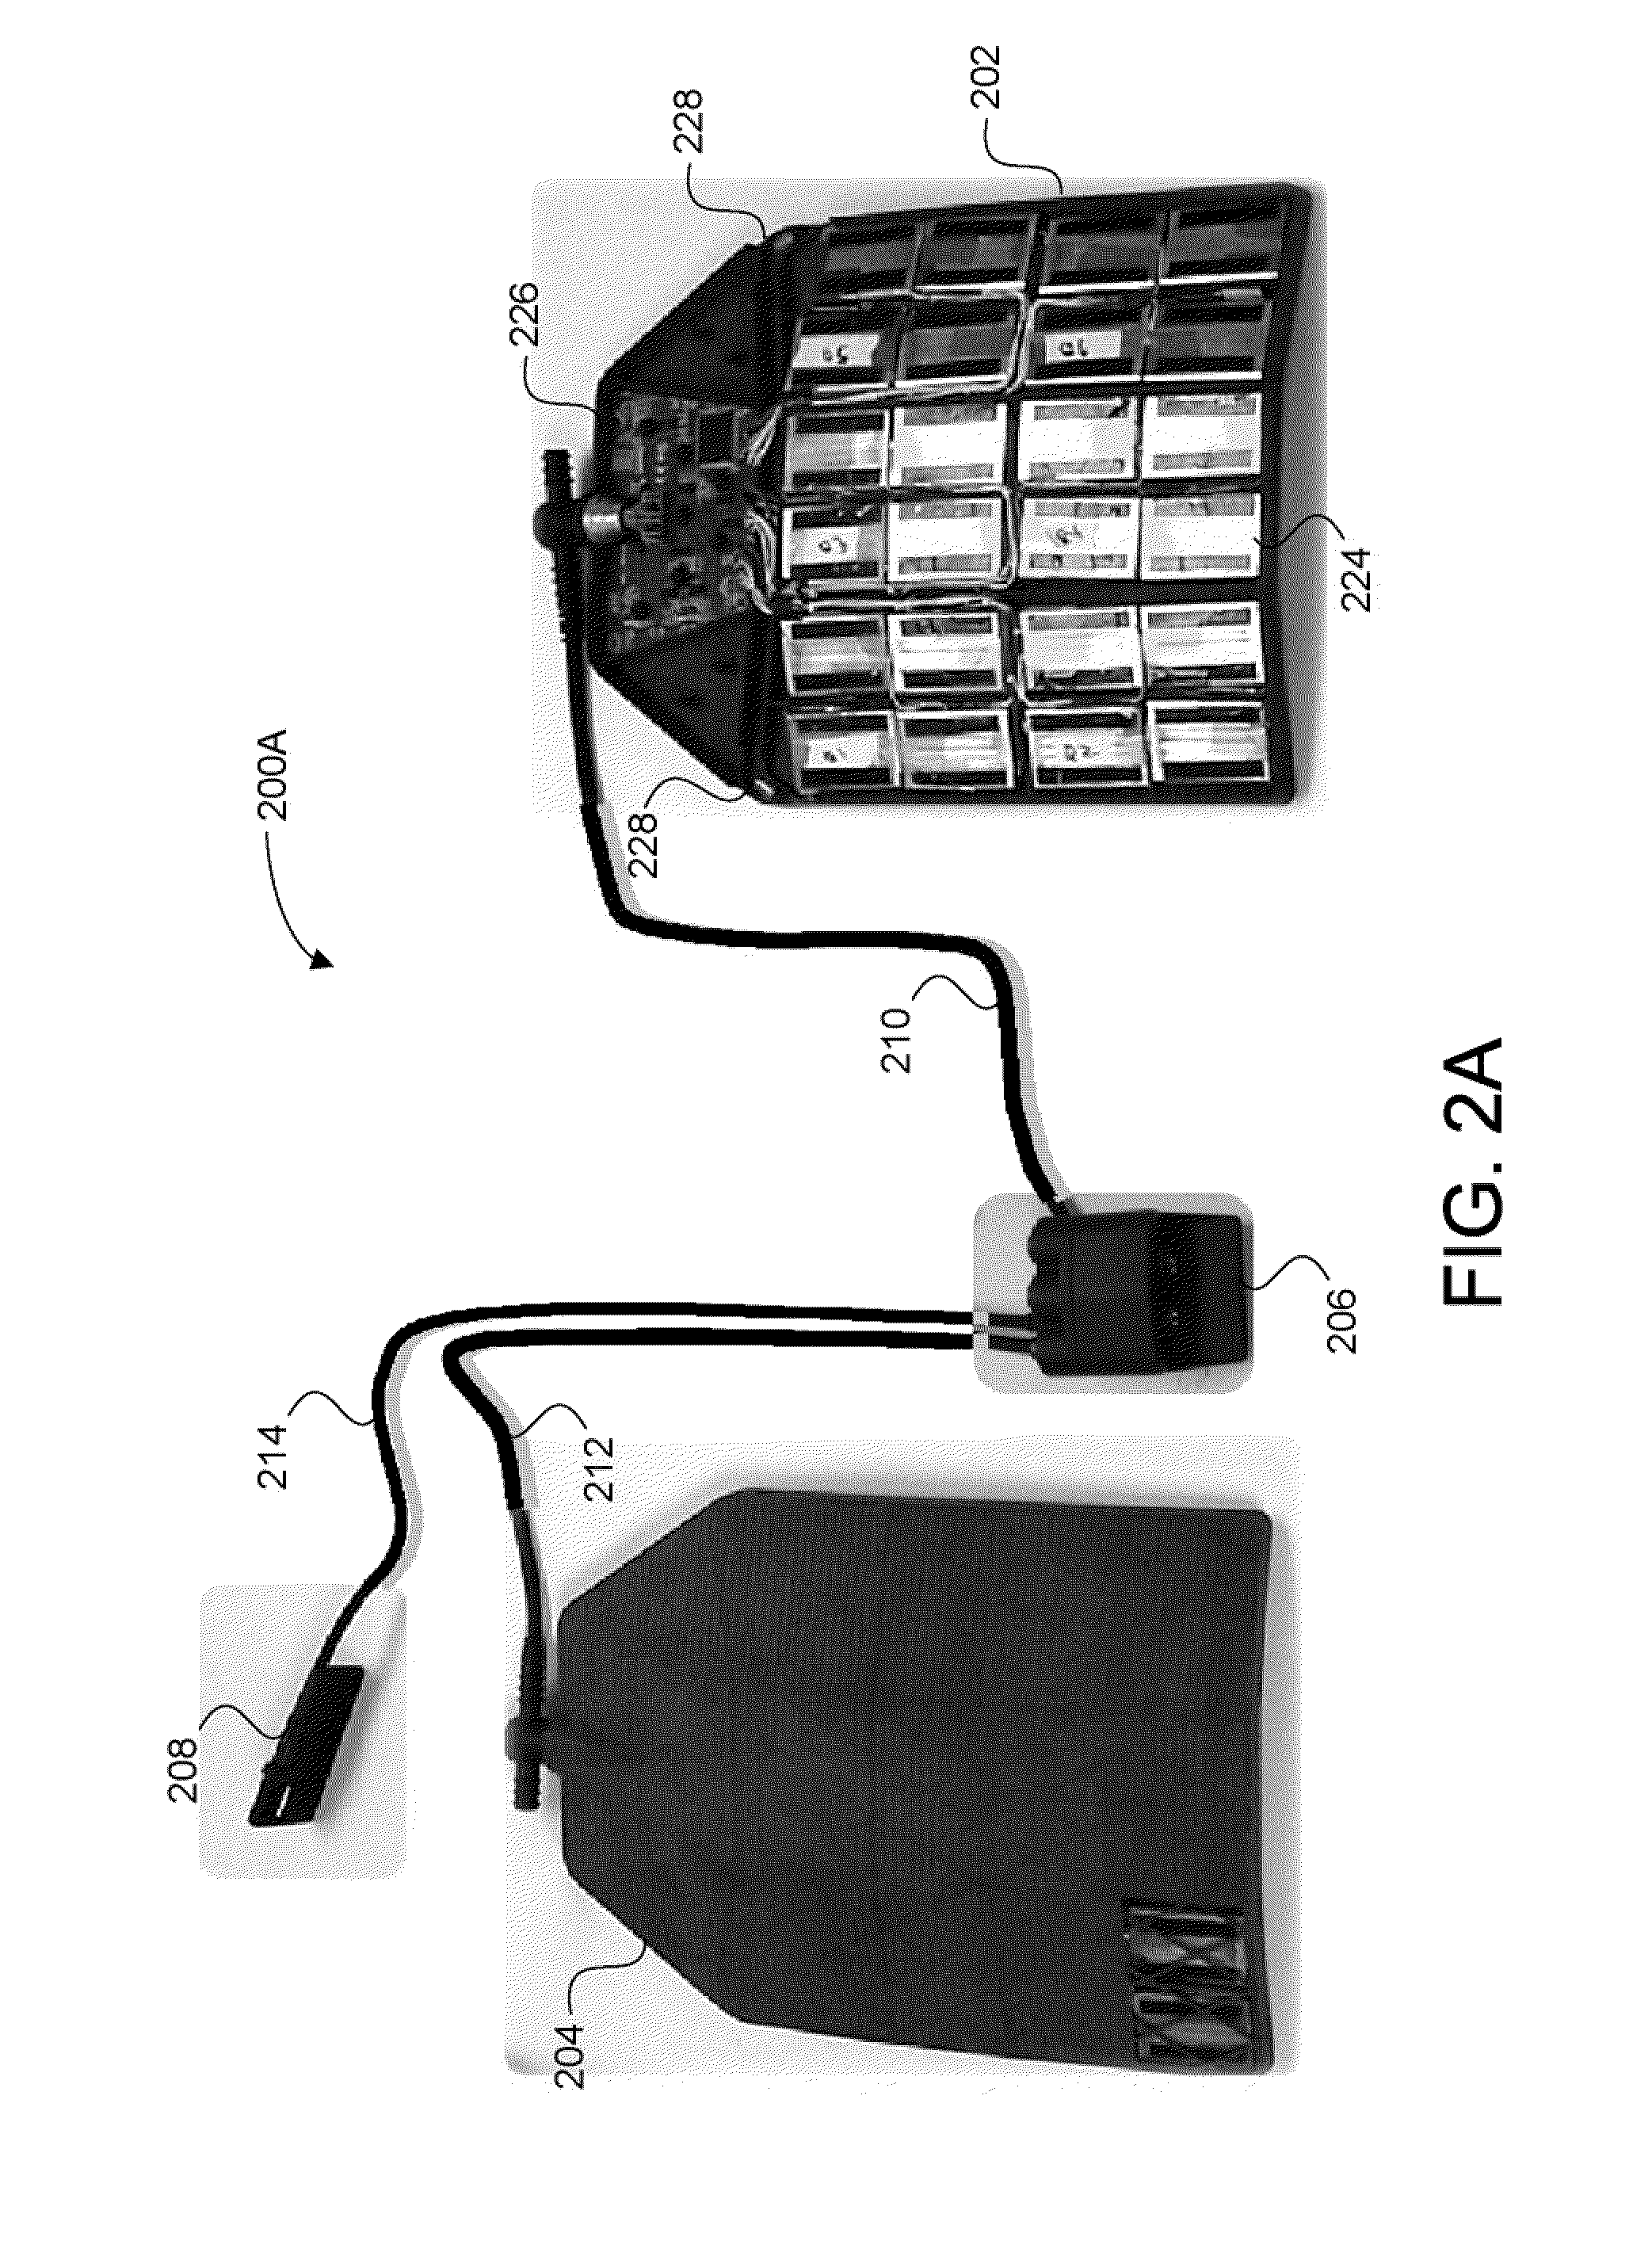 Portable electrical power source for incorporation with an armored garment